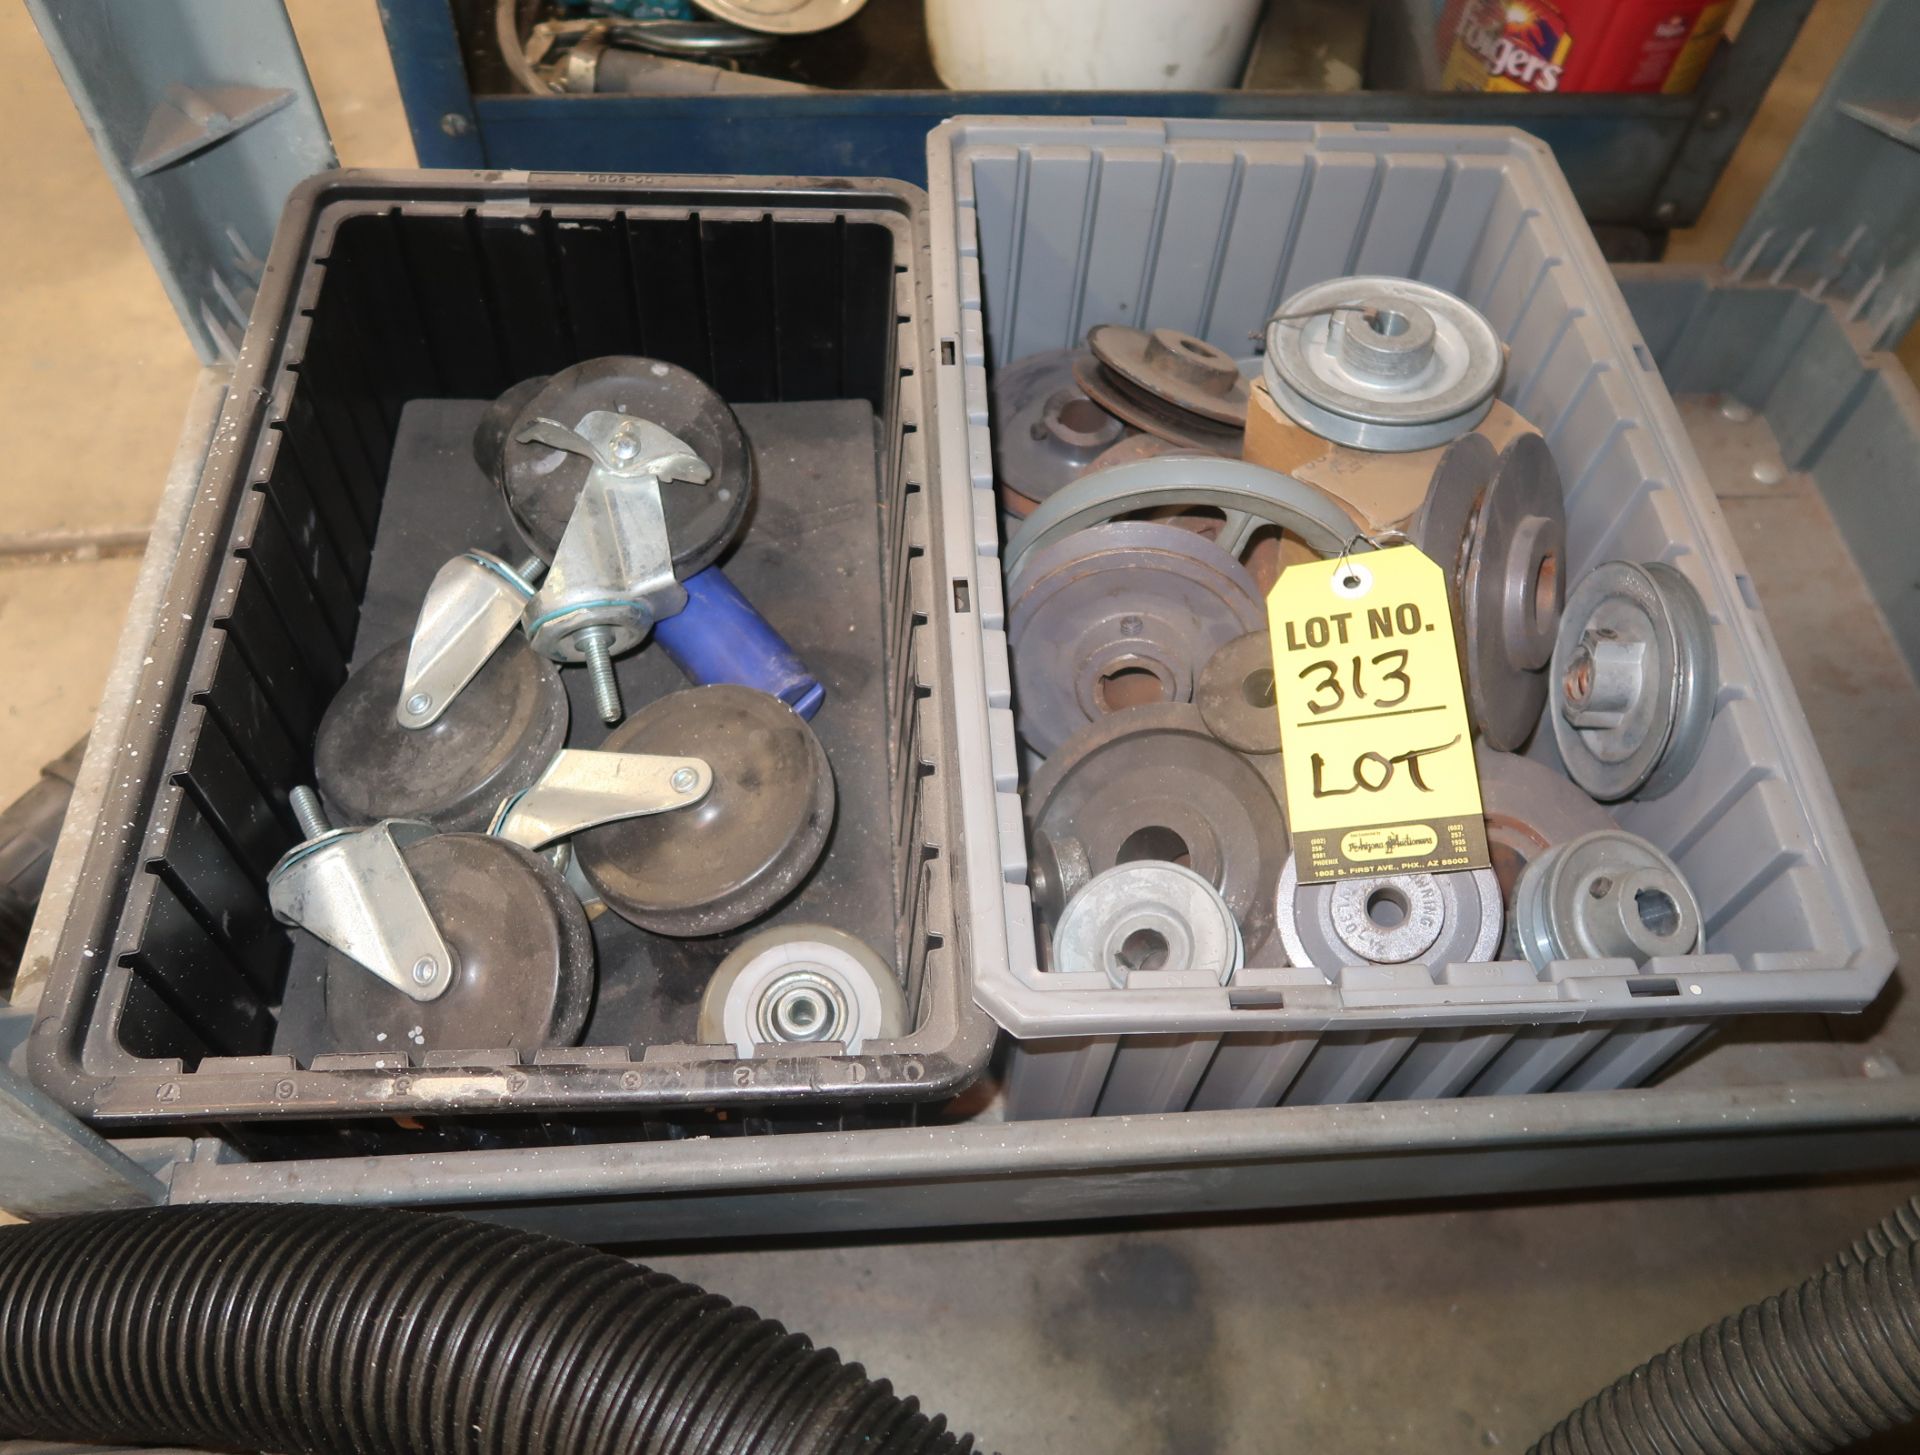 LOT PULLY WHEELS & CASTERS